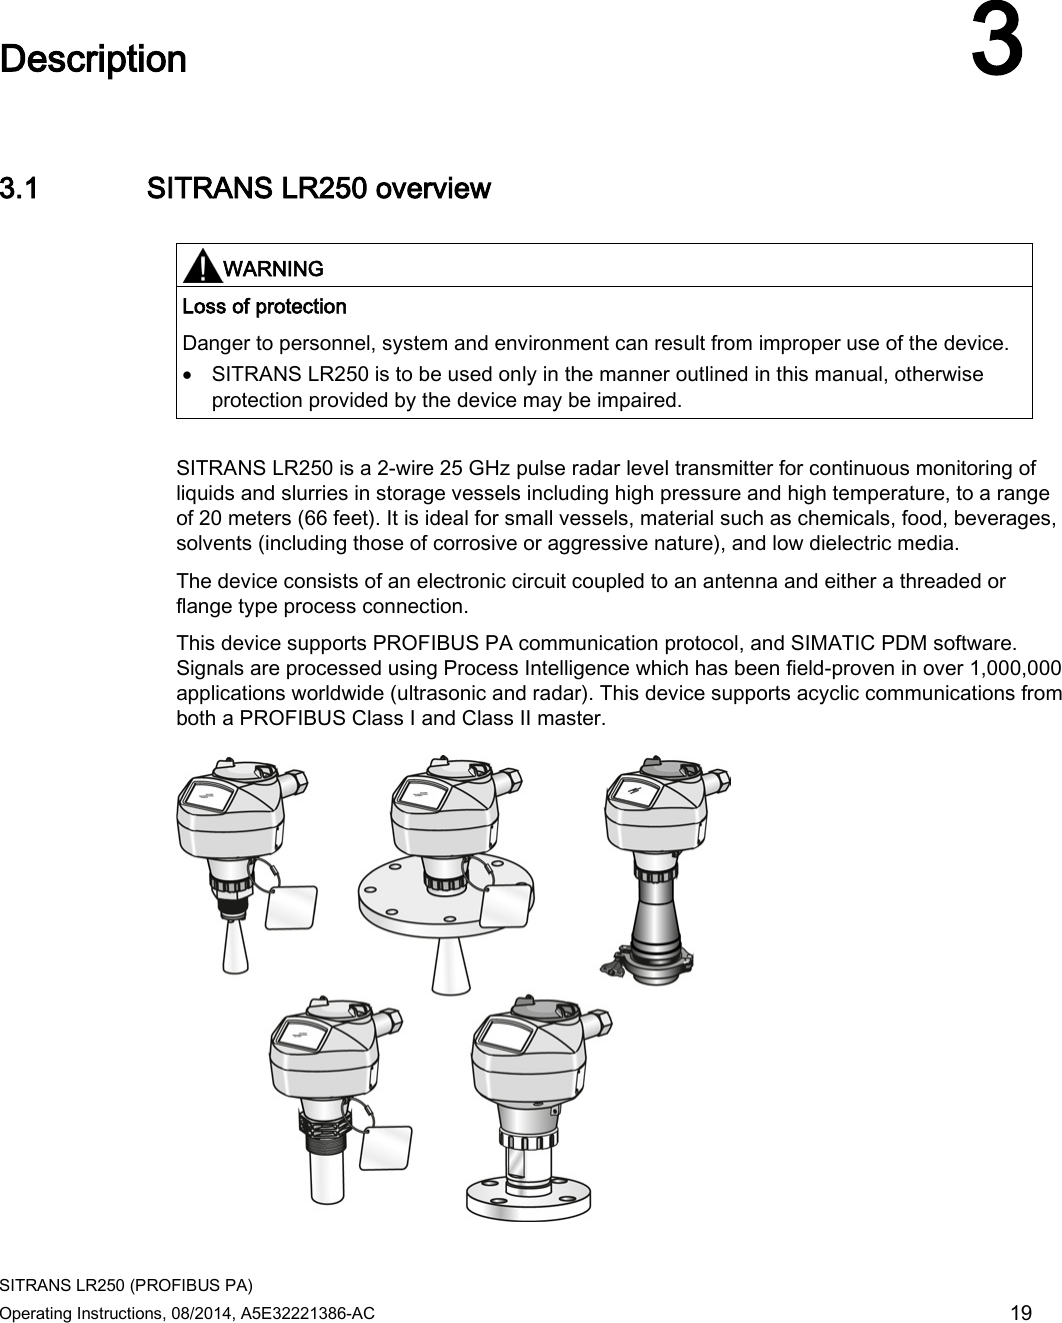  SITRANS LR250 (PROFIBUS PA) Operating Instructions, 08/2014, A5E32221386-AC 19  Description 3 3.1 SITRANS LR250 overview   WARNING Loss of protection Danger to personnel, system and environment can result from improper use of the device. • SITRANS LR250 is to be used only in the manner outlined in this manual, otherwise protection provided by the device may be impaired.  SITRANS LR250 is a 2-wire 25 GHz pulse radar level transmitter for continuous monitoring of liquids and slurries in storage vessels including high pressure and high temperature, to a range of 20 meters (66 feet). It is ideal for small vessels, material such as chemicals, food, beverages, solvents (including those of corrosive or aggressive nature), and low dielectric media.  The device consists of an electronic circuit coupled to an antenna and either a threaded or flange type process connection. This device supports PROFIBUS PA communication protocol, and SIMATIC PDM software. Signals are processed using Process Intelligence which has been field-proven in over 1,000,000 applications worldwide (ultrasonic and radar). This device supports acyclic communications from both a PROFIBUS Class I and Class II master.  